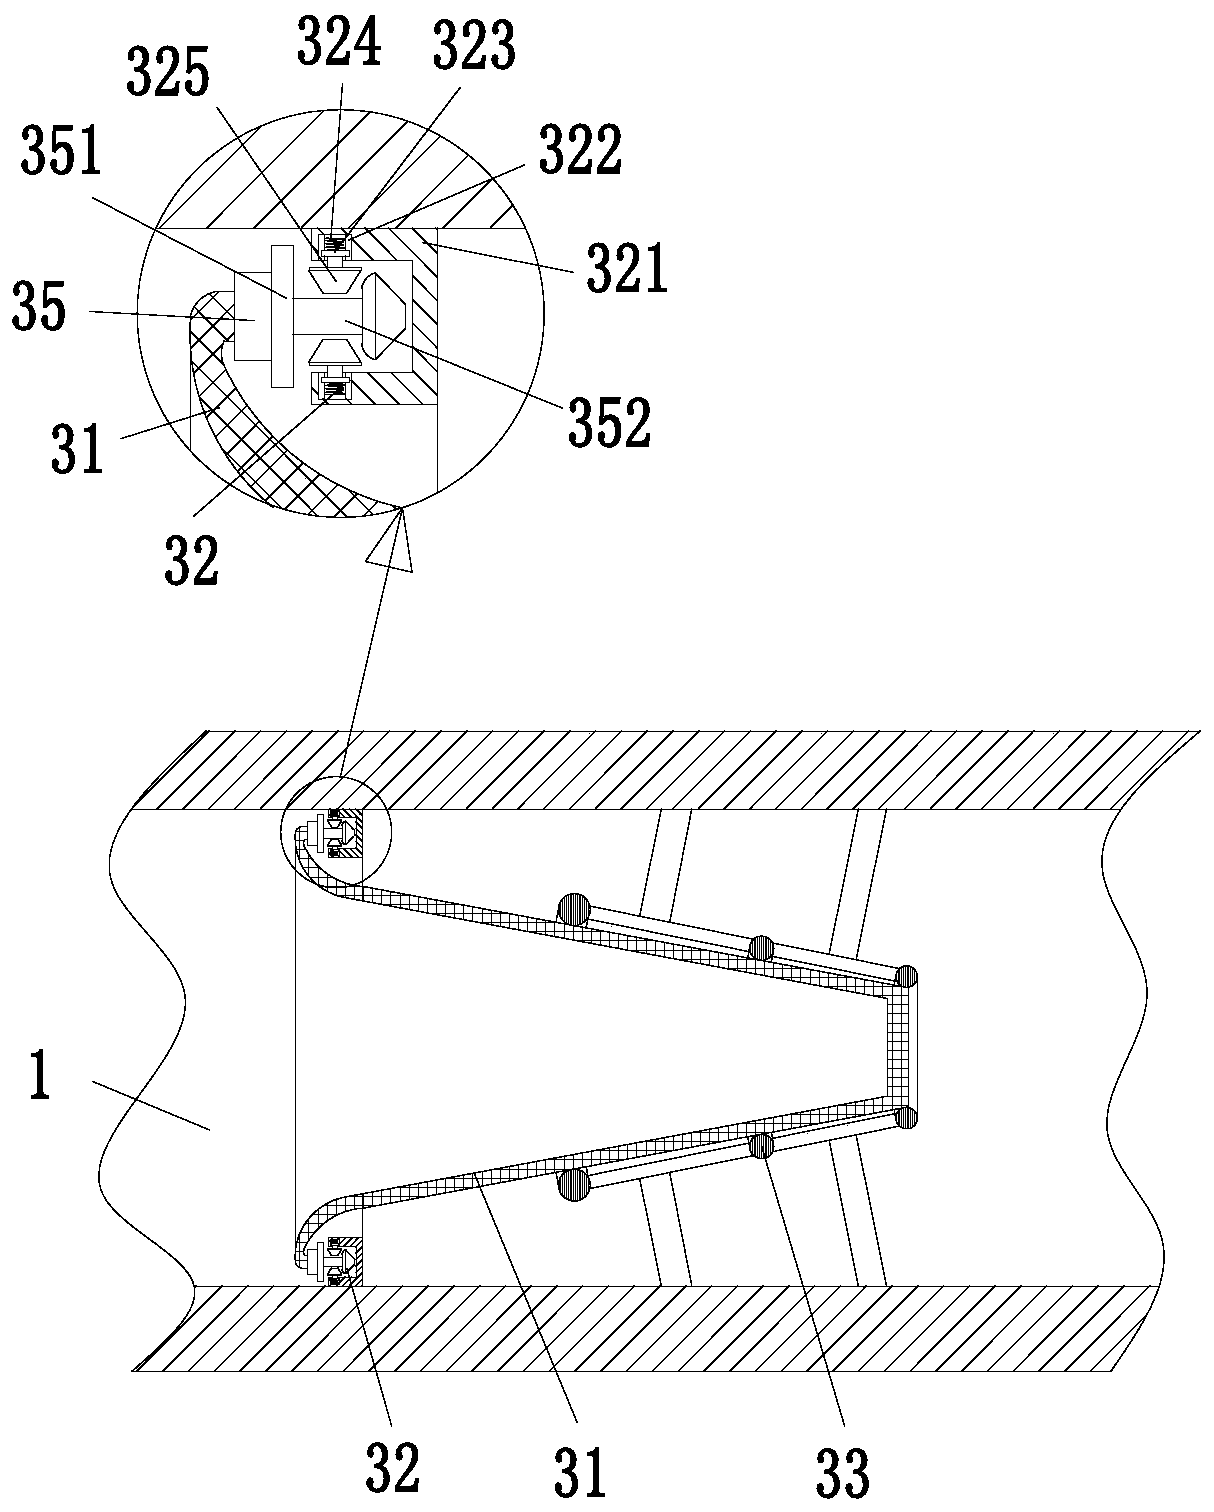 Treatment device for desulfurization and denitration of high-temperature industrial flue gas